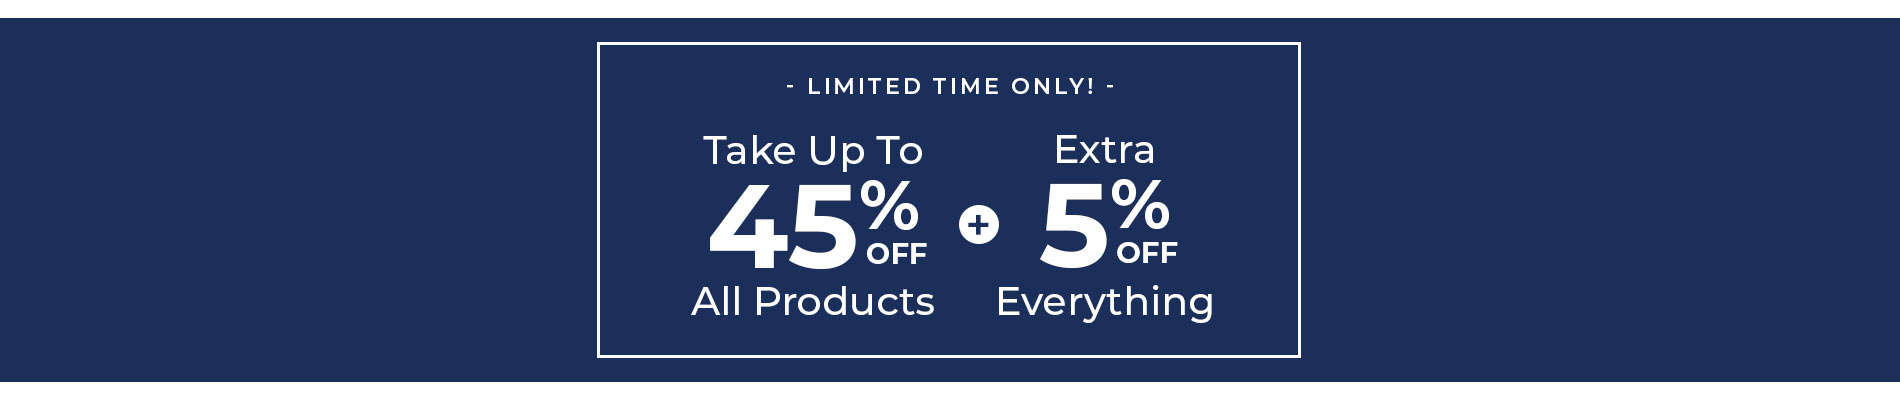 Take Up To 45% Off + Extra 5% Off Everything